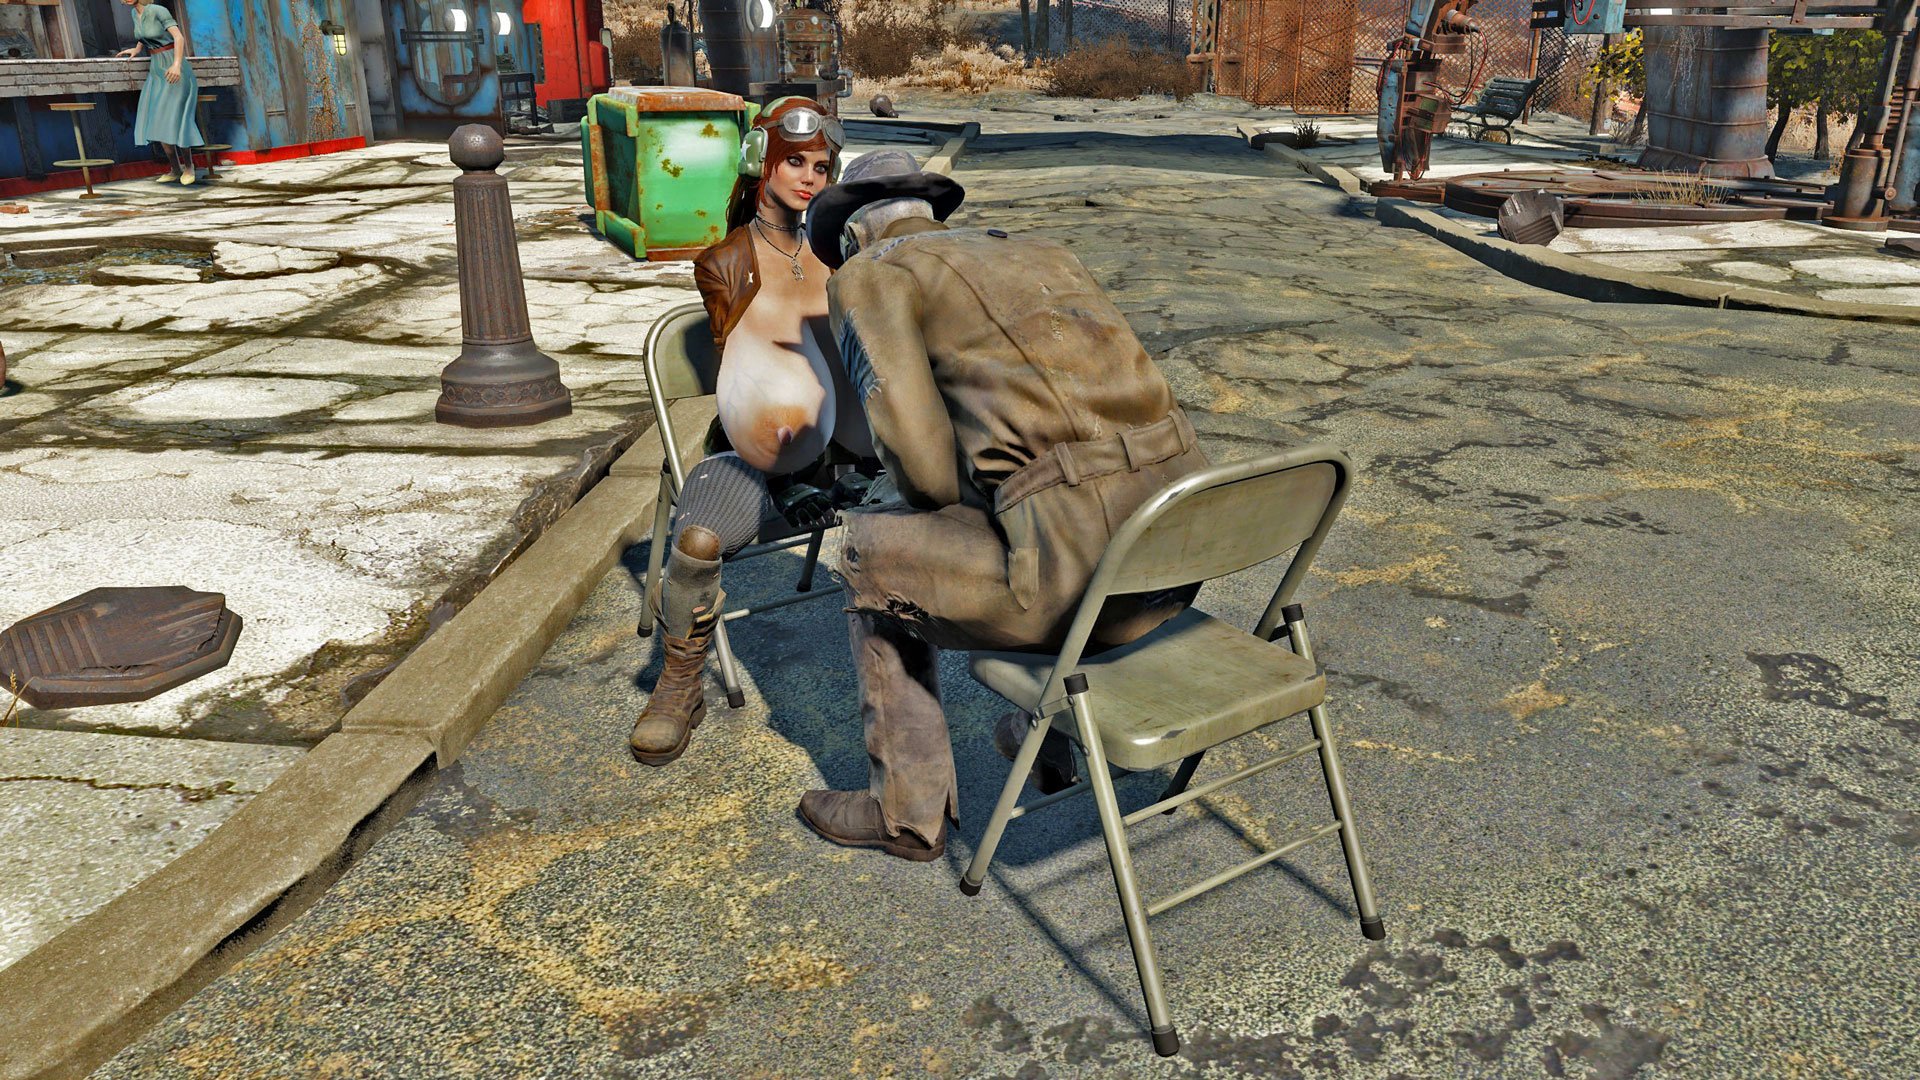 Fallout 4 hookers of the commonwealth lite hotc lite фото 90